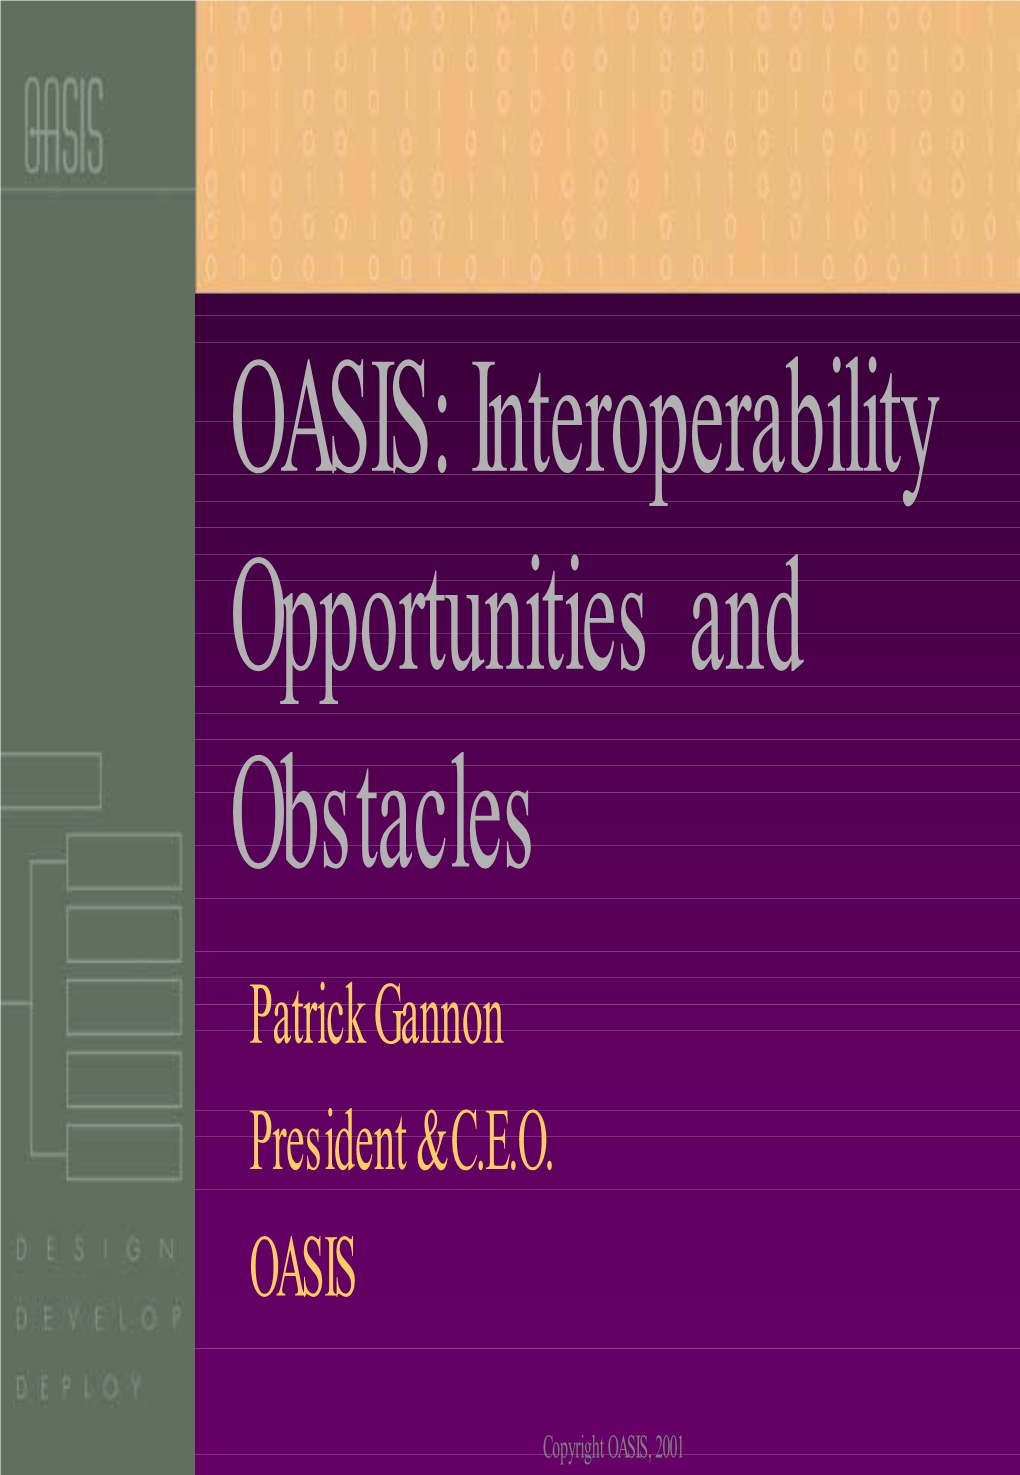 OASIS: Interoperability Opportunities and Obstacles Patrick Gannon President & C.E.O